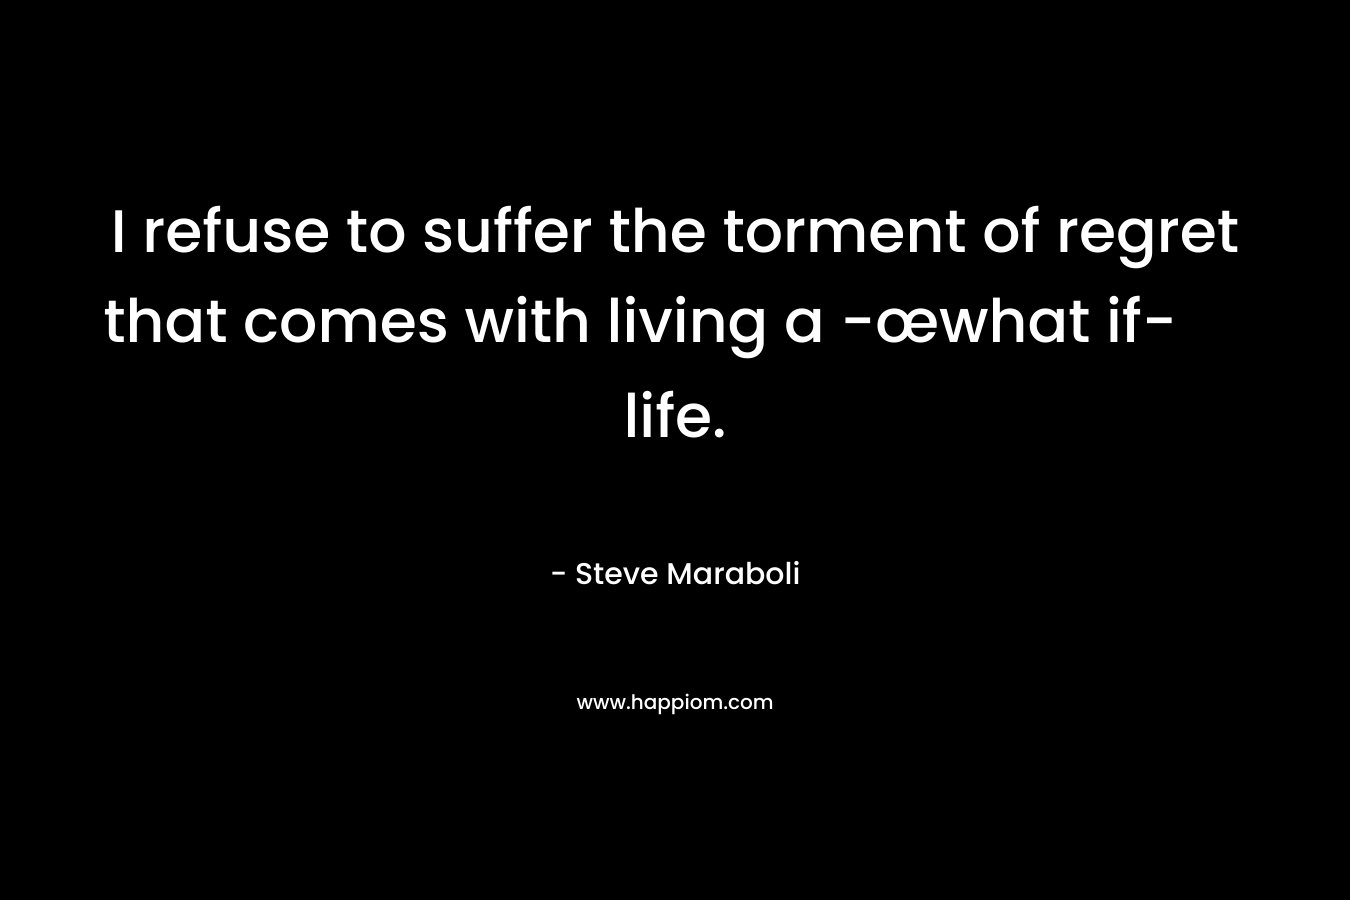 I refuse to suffer the torment of regret that comes with living a -œwhat if- life.